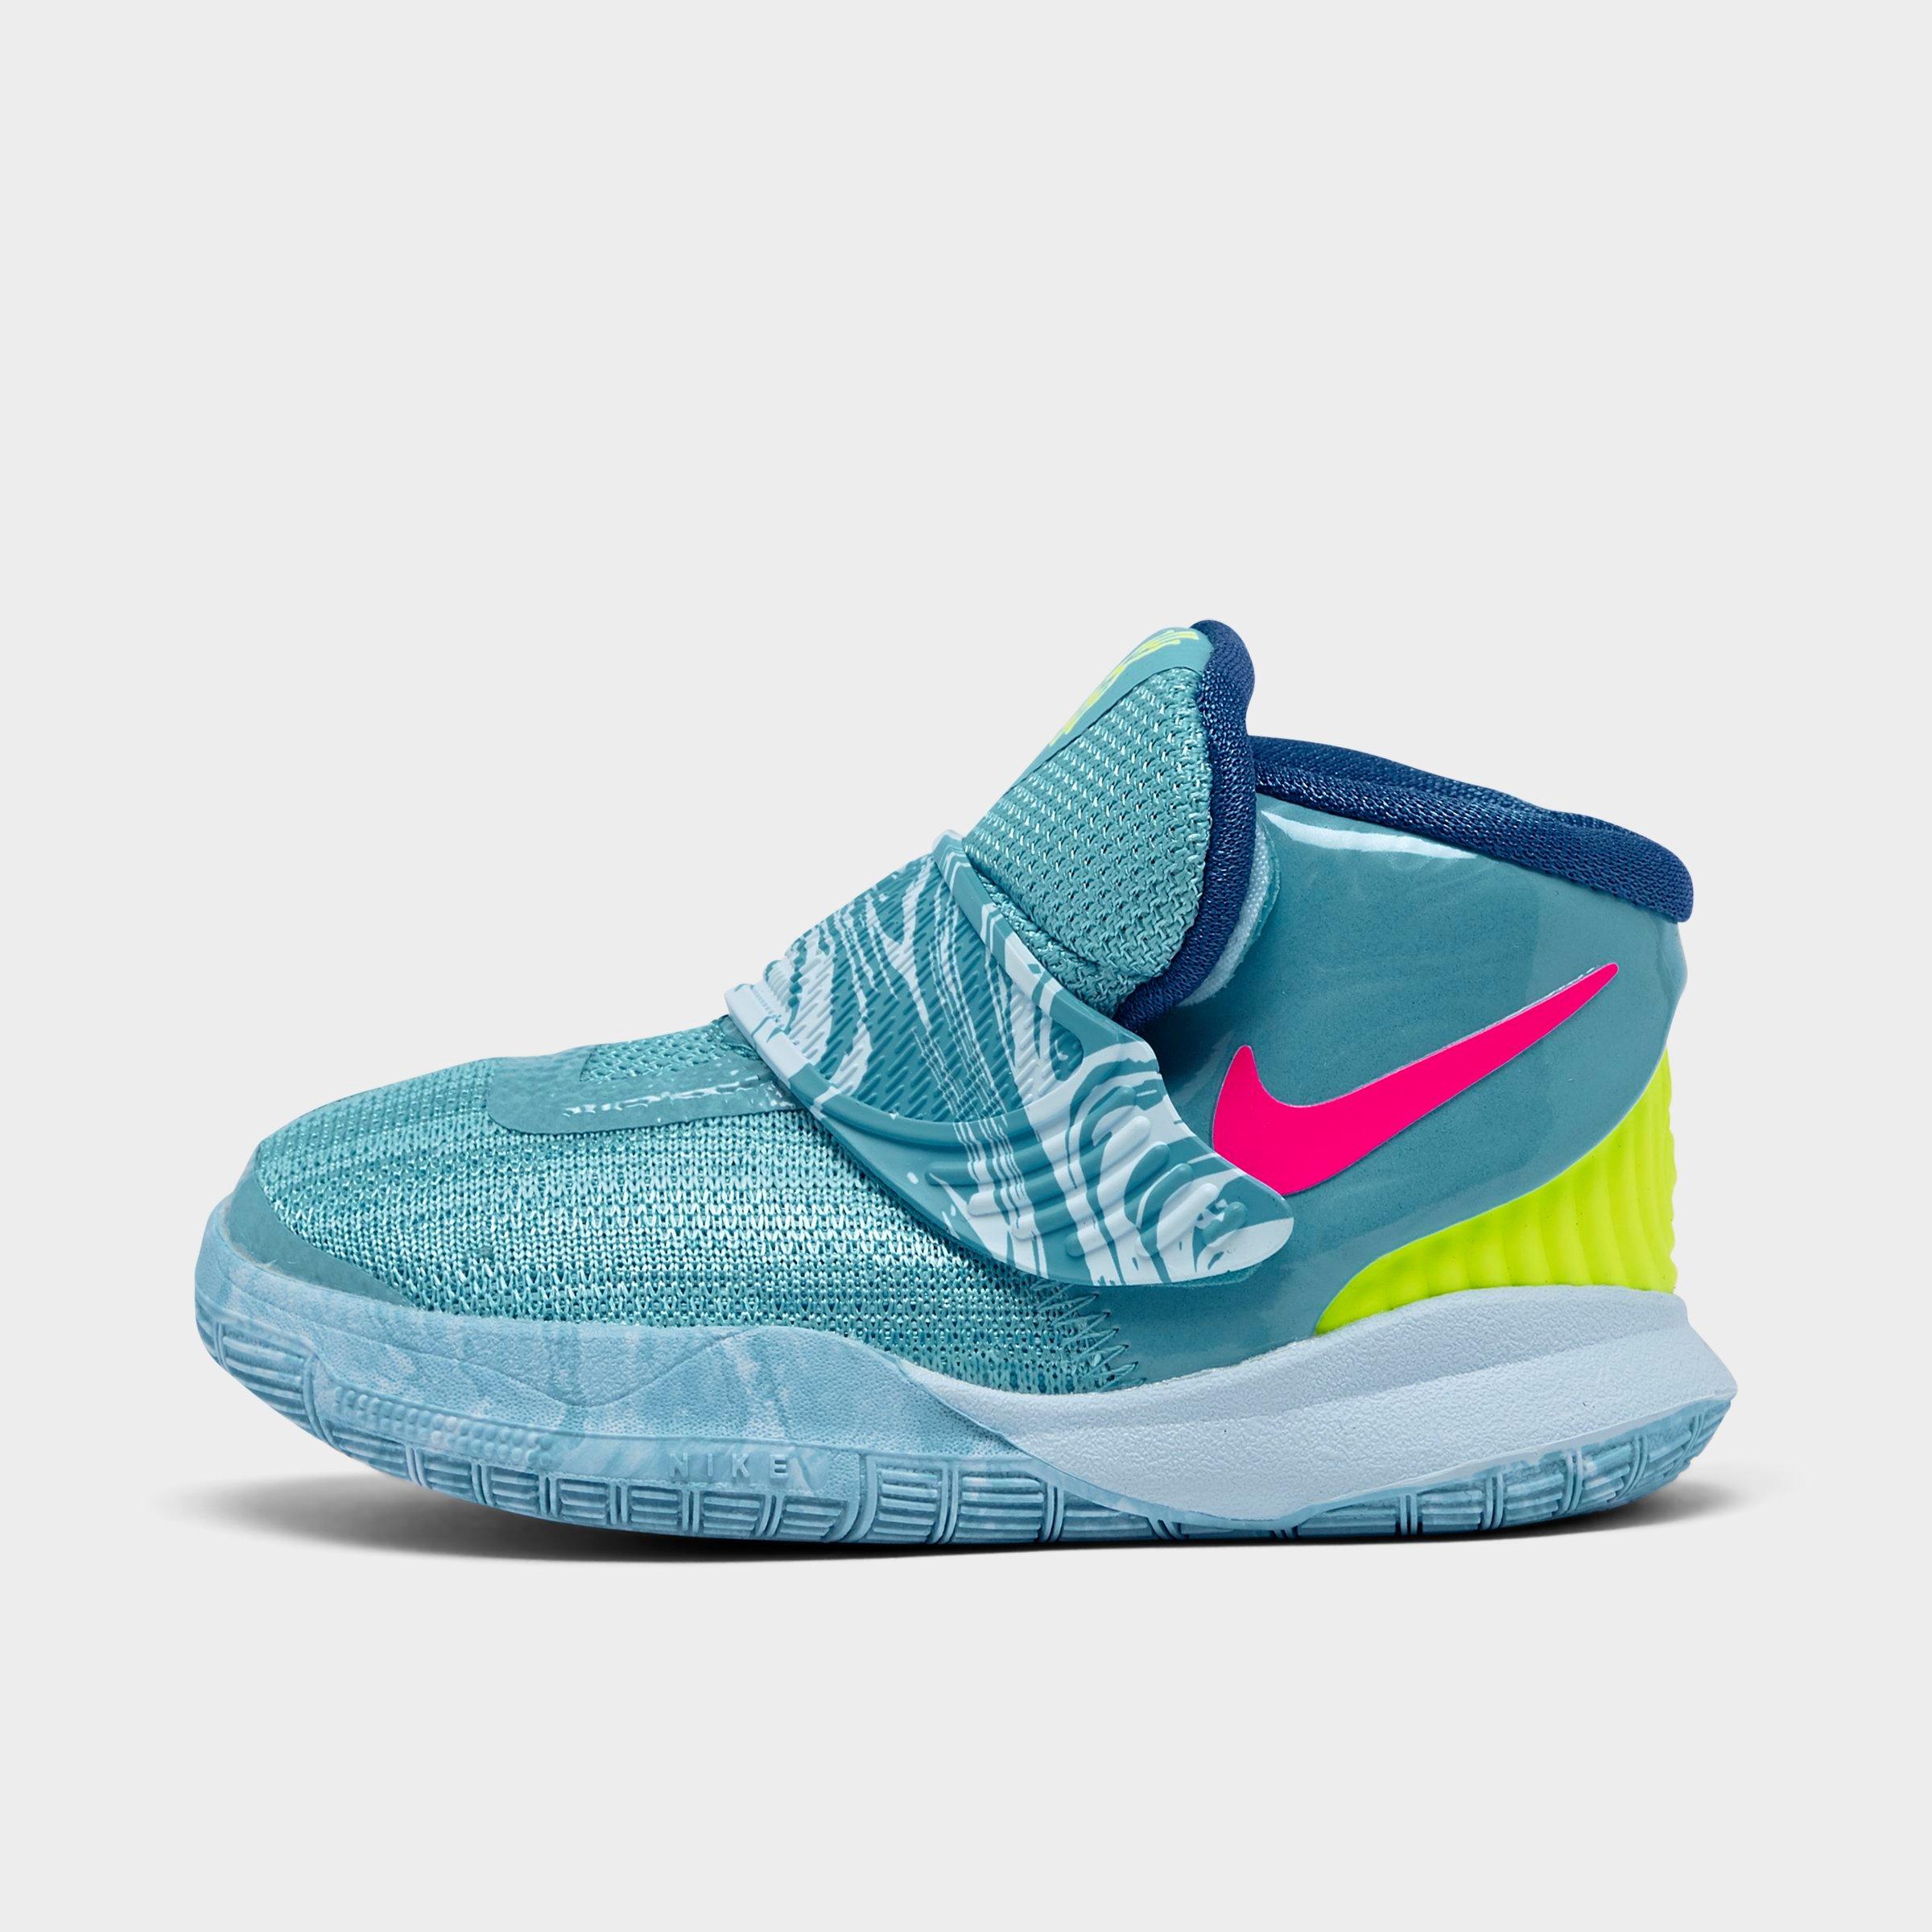 finish line kyrie